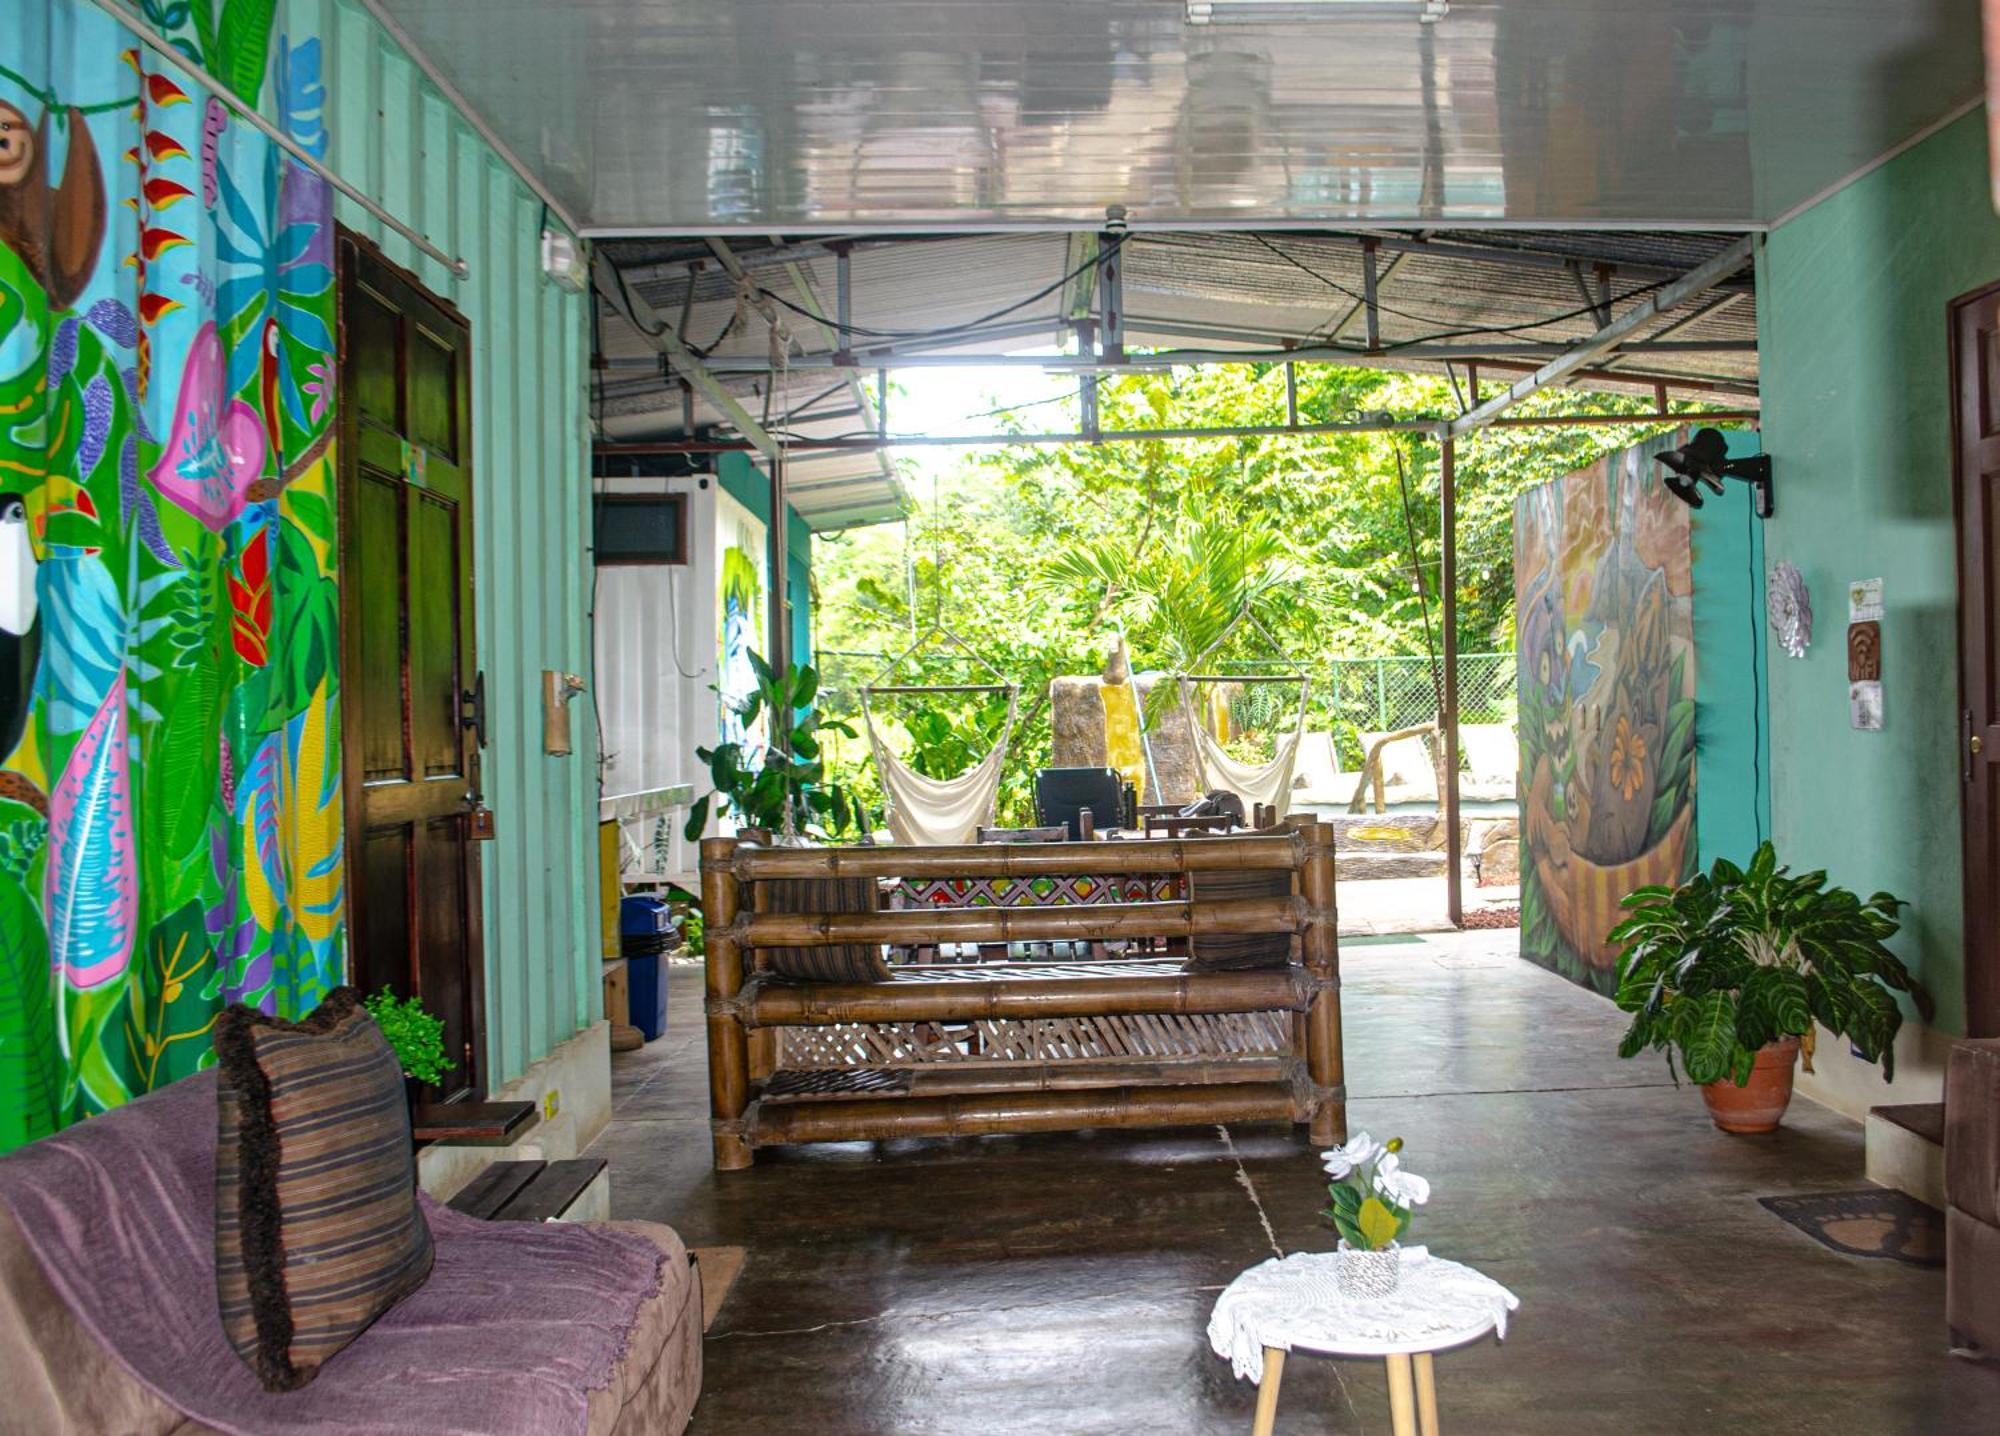 The Jungle Container Bed & Breakfast เกโปส ภายนอก รูปภาพ